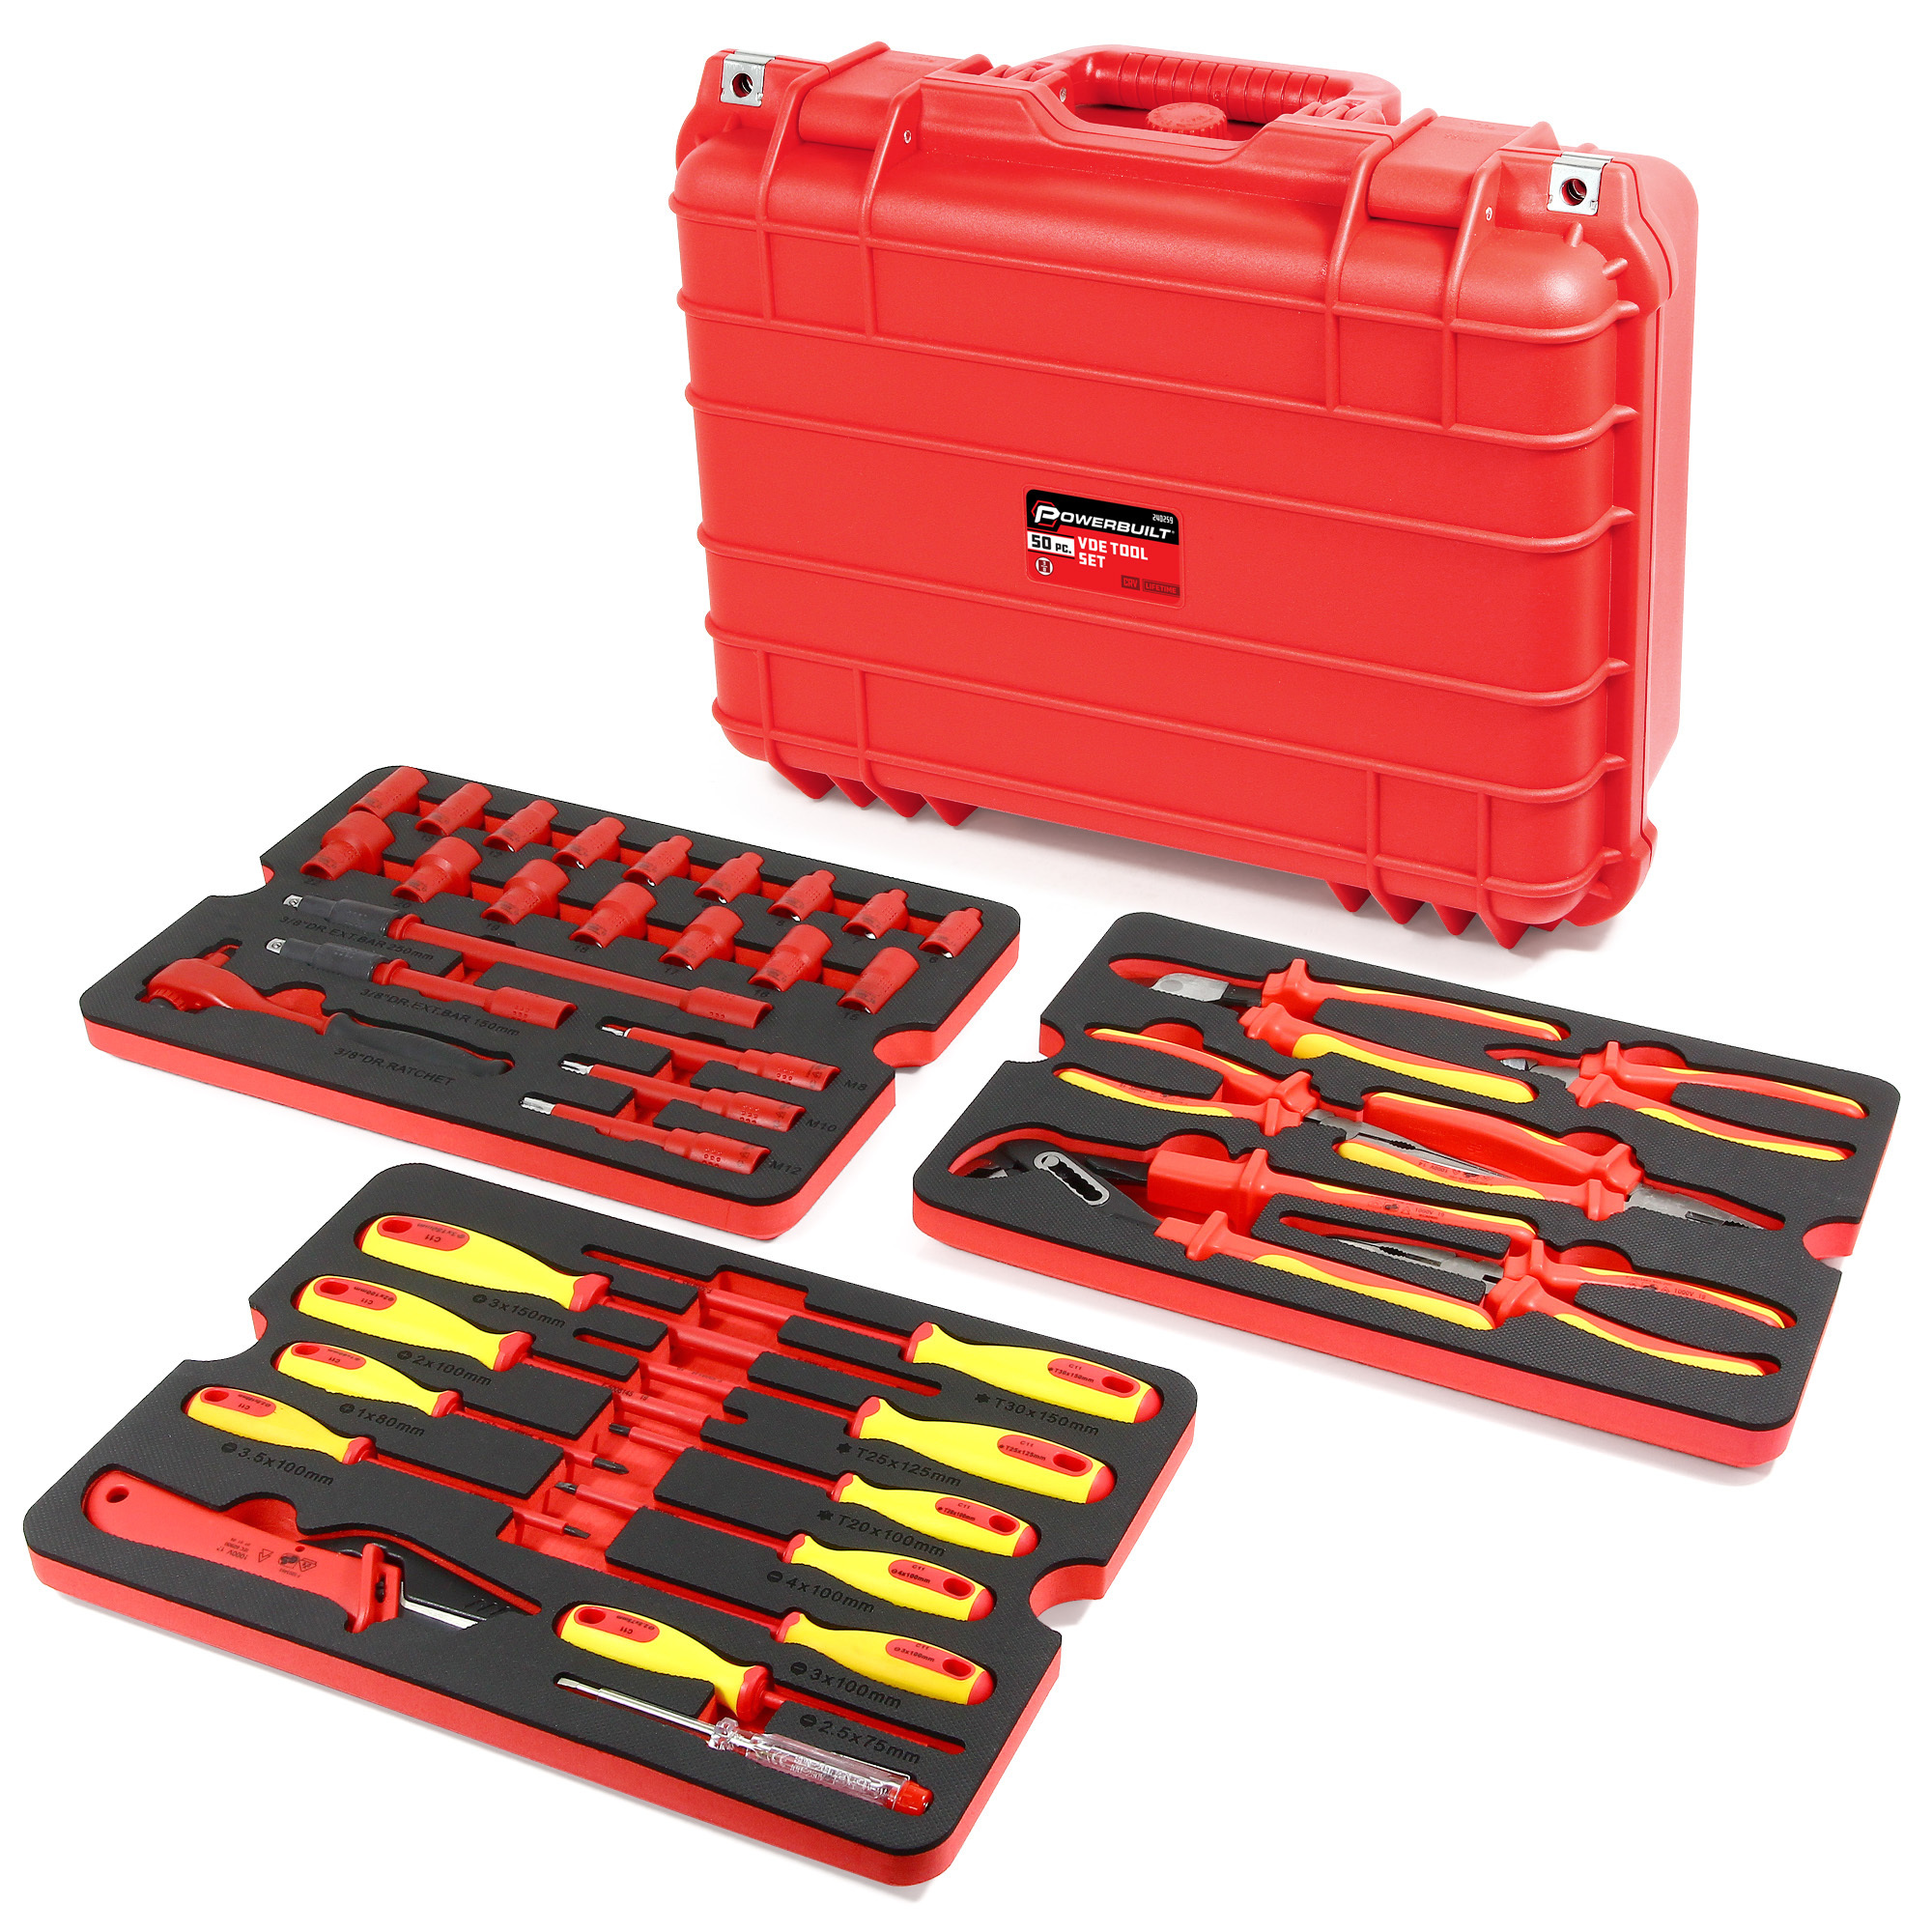 Powerbuilt, 50 Piece Master VDE Electrical Tool Set with Case, Pieces (qty.) 50, Model 240259